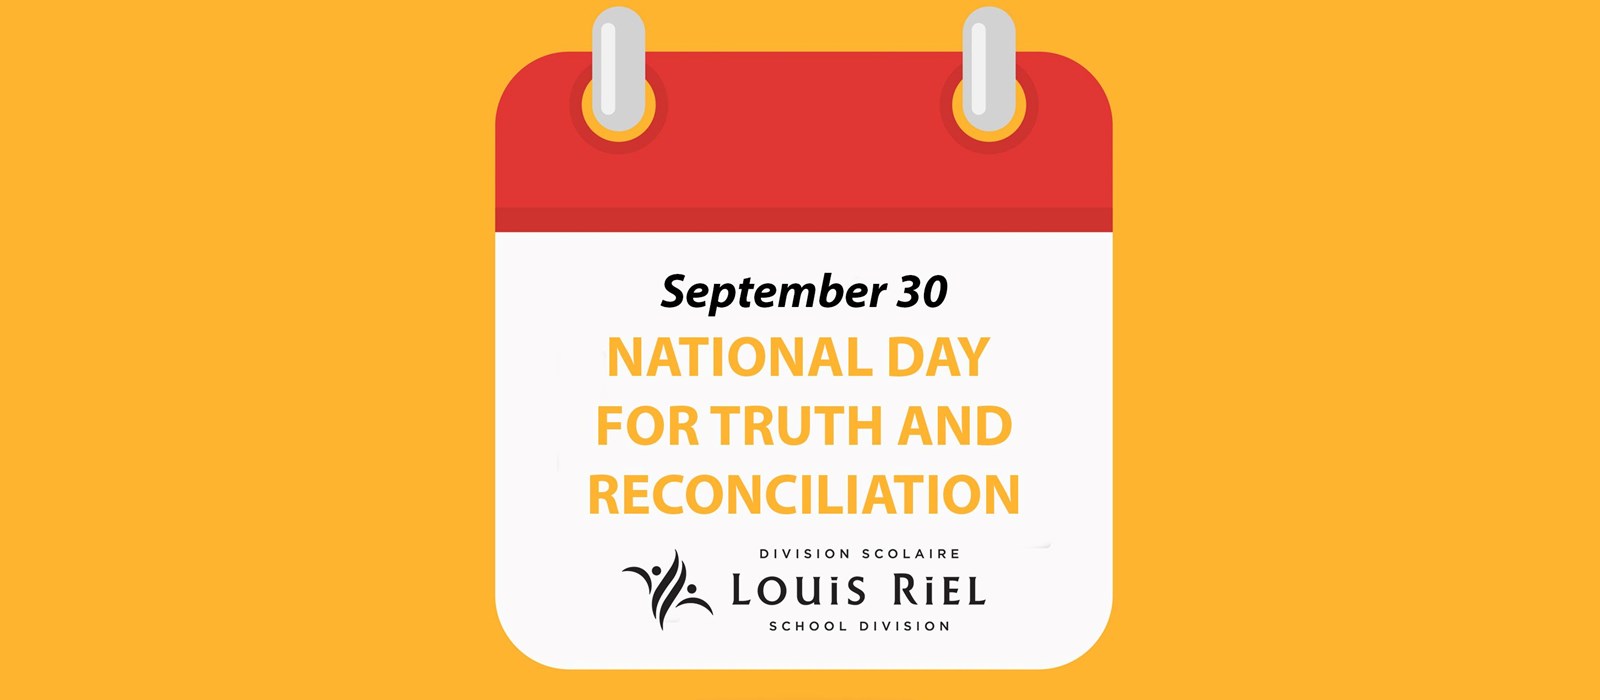 A calendar that says "September 30: National Day for Truth and Reconciliation"